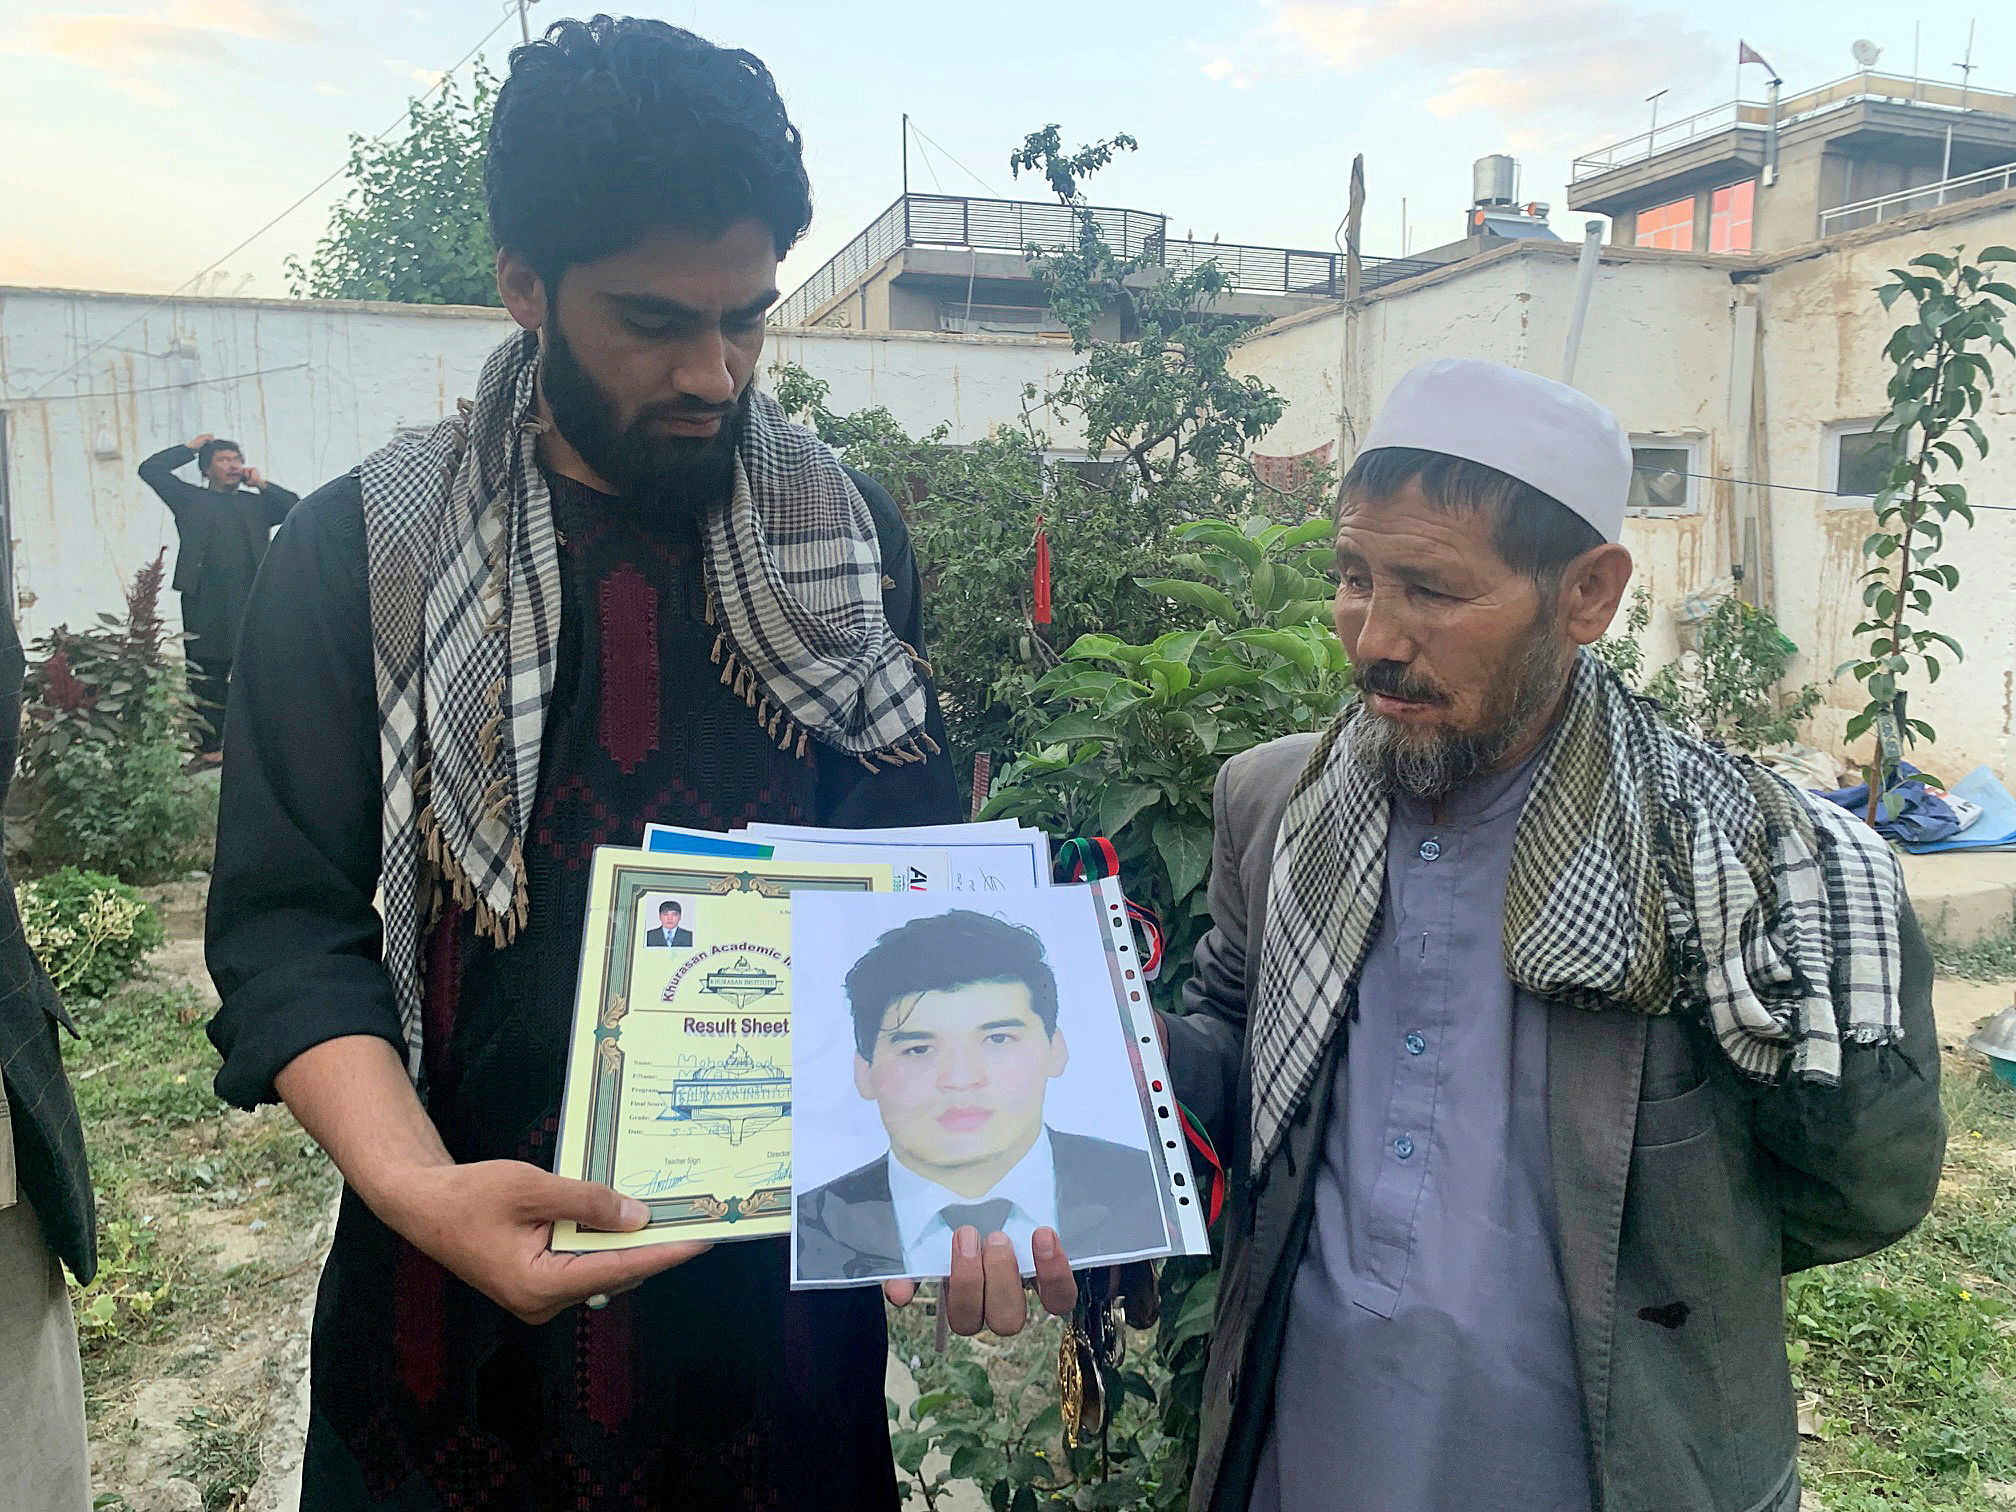 Afghans killed in airport attack were seeking new lives abroad